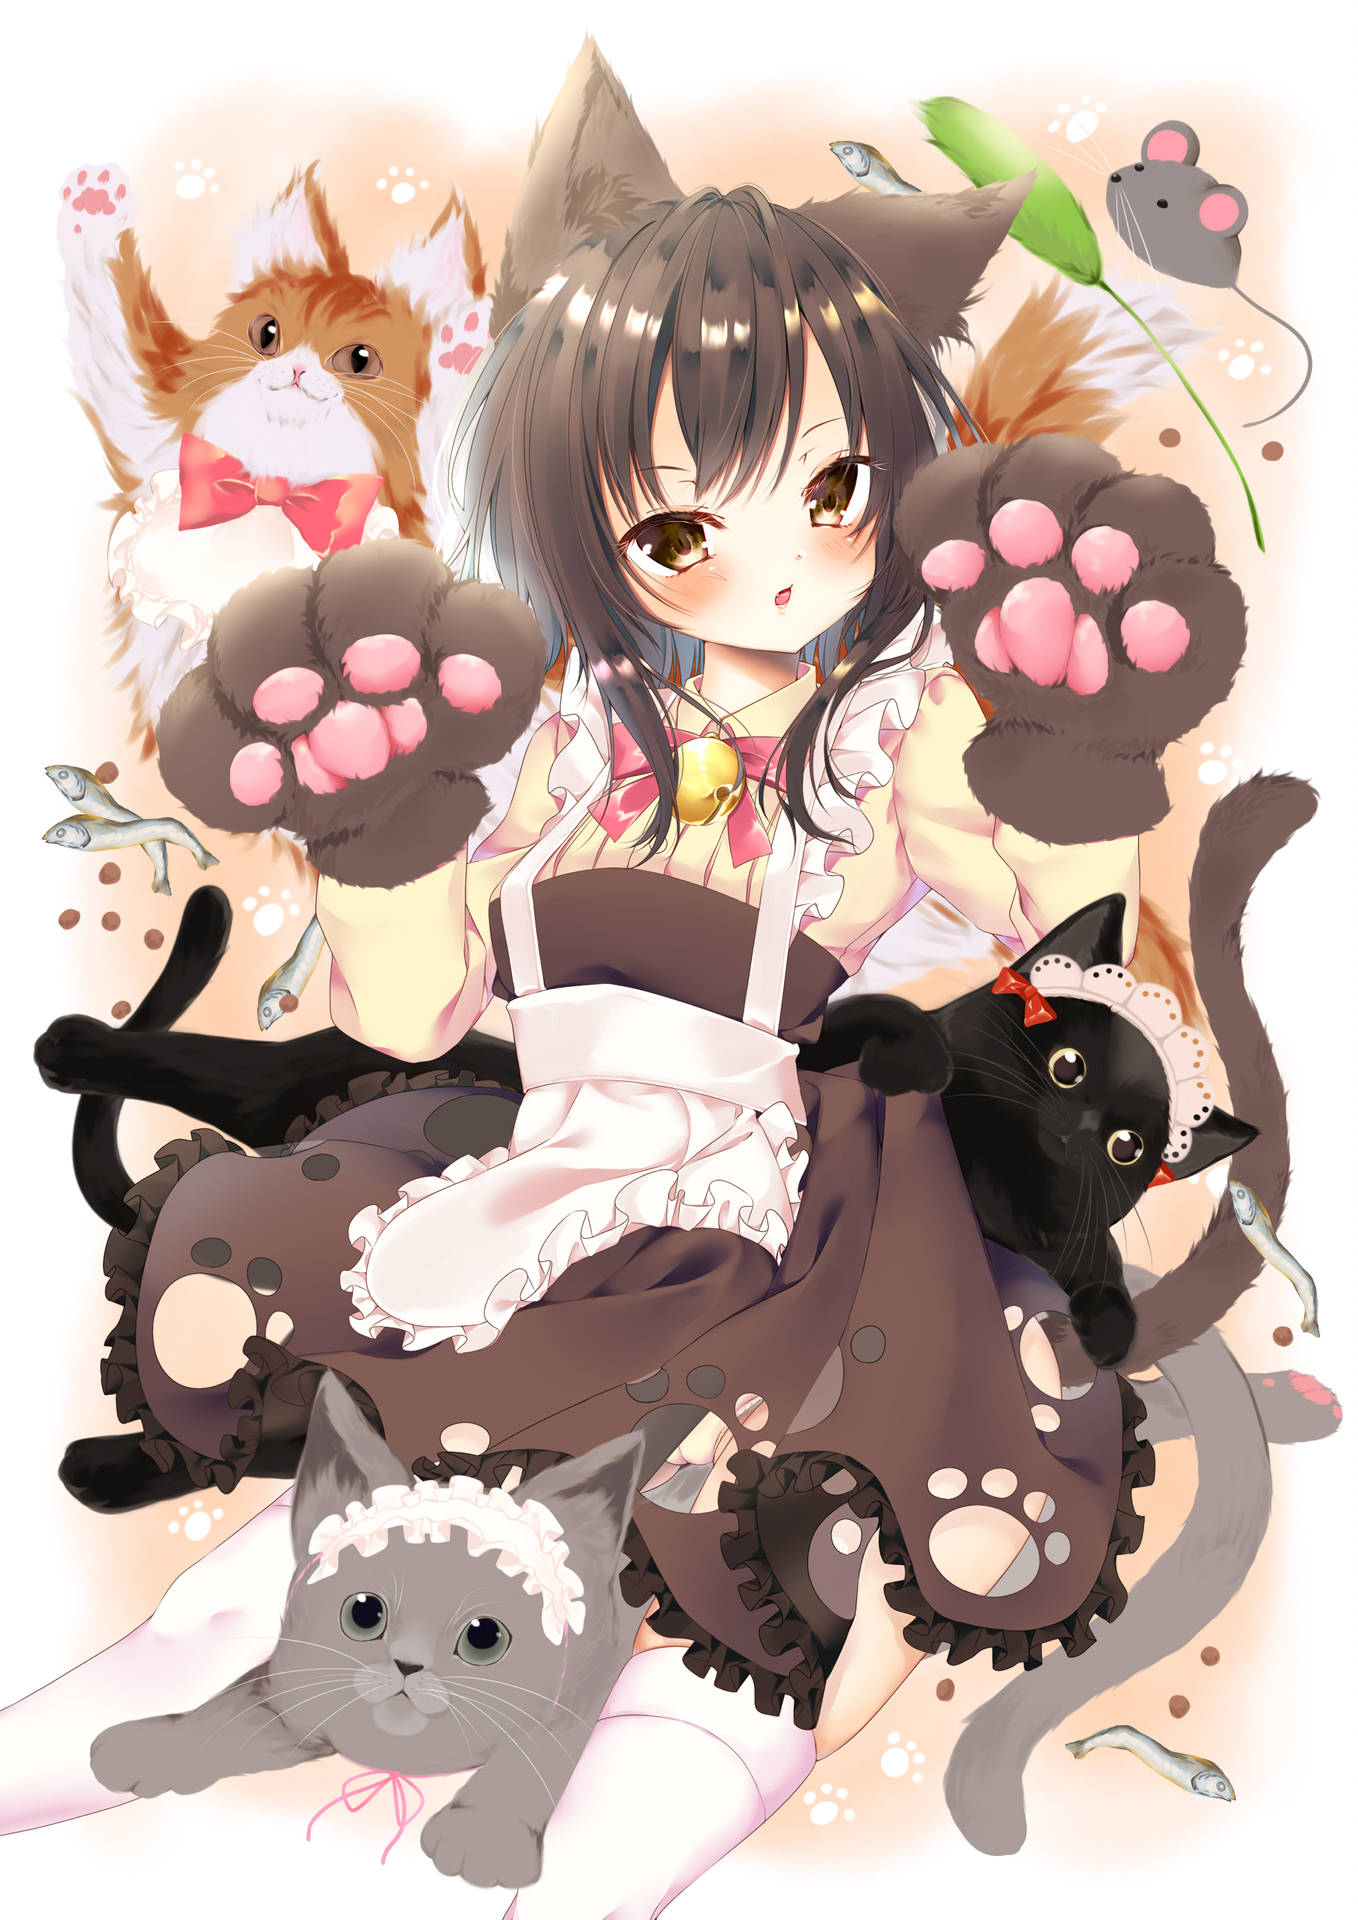 Cute Anime Girl With Cats